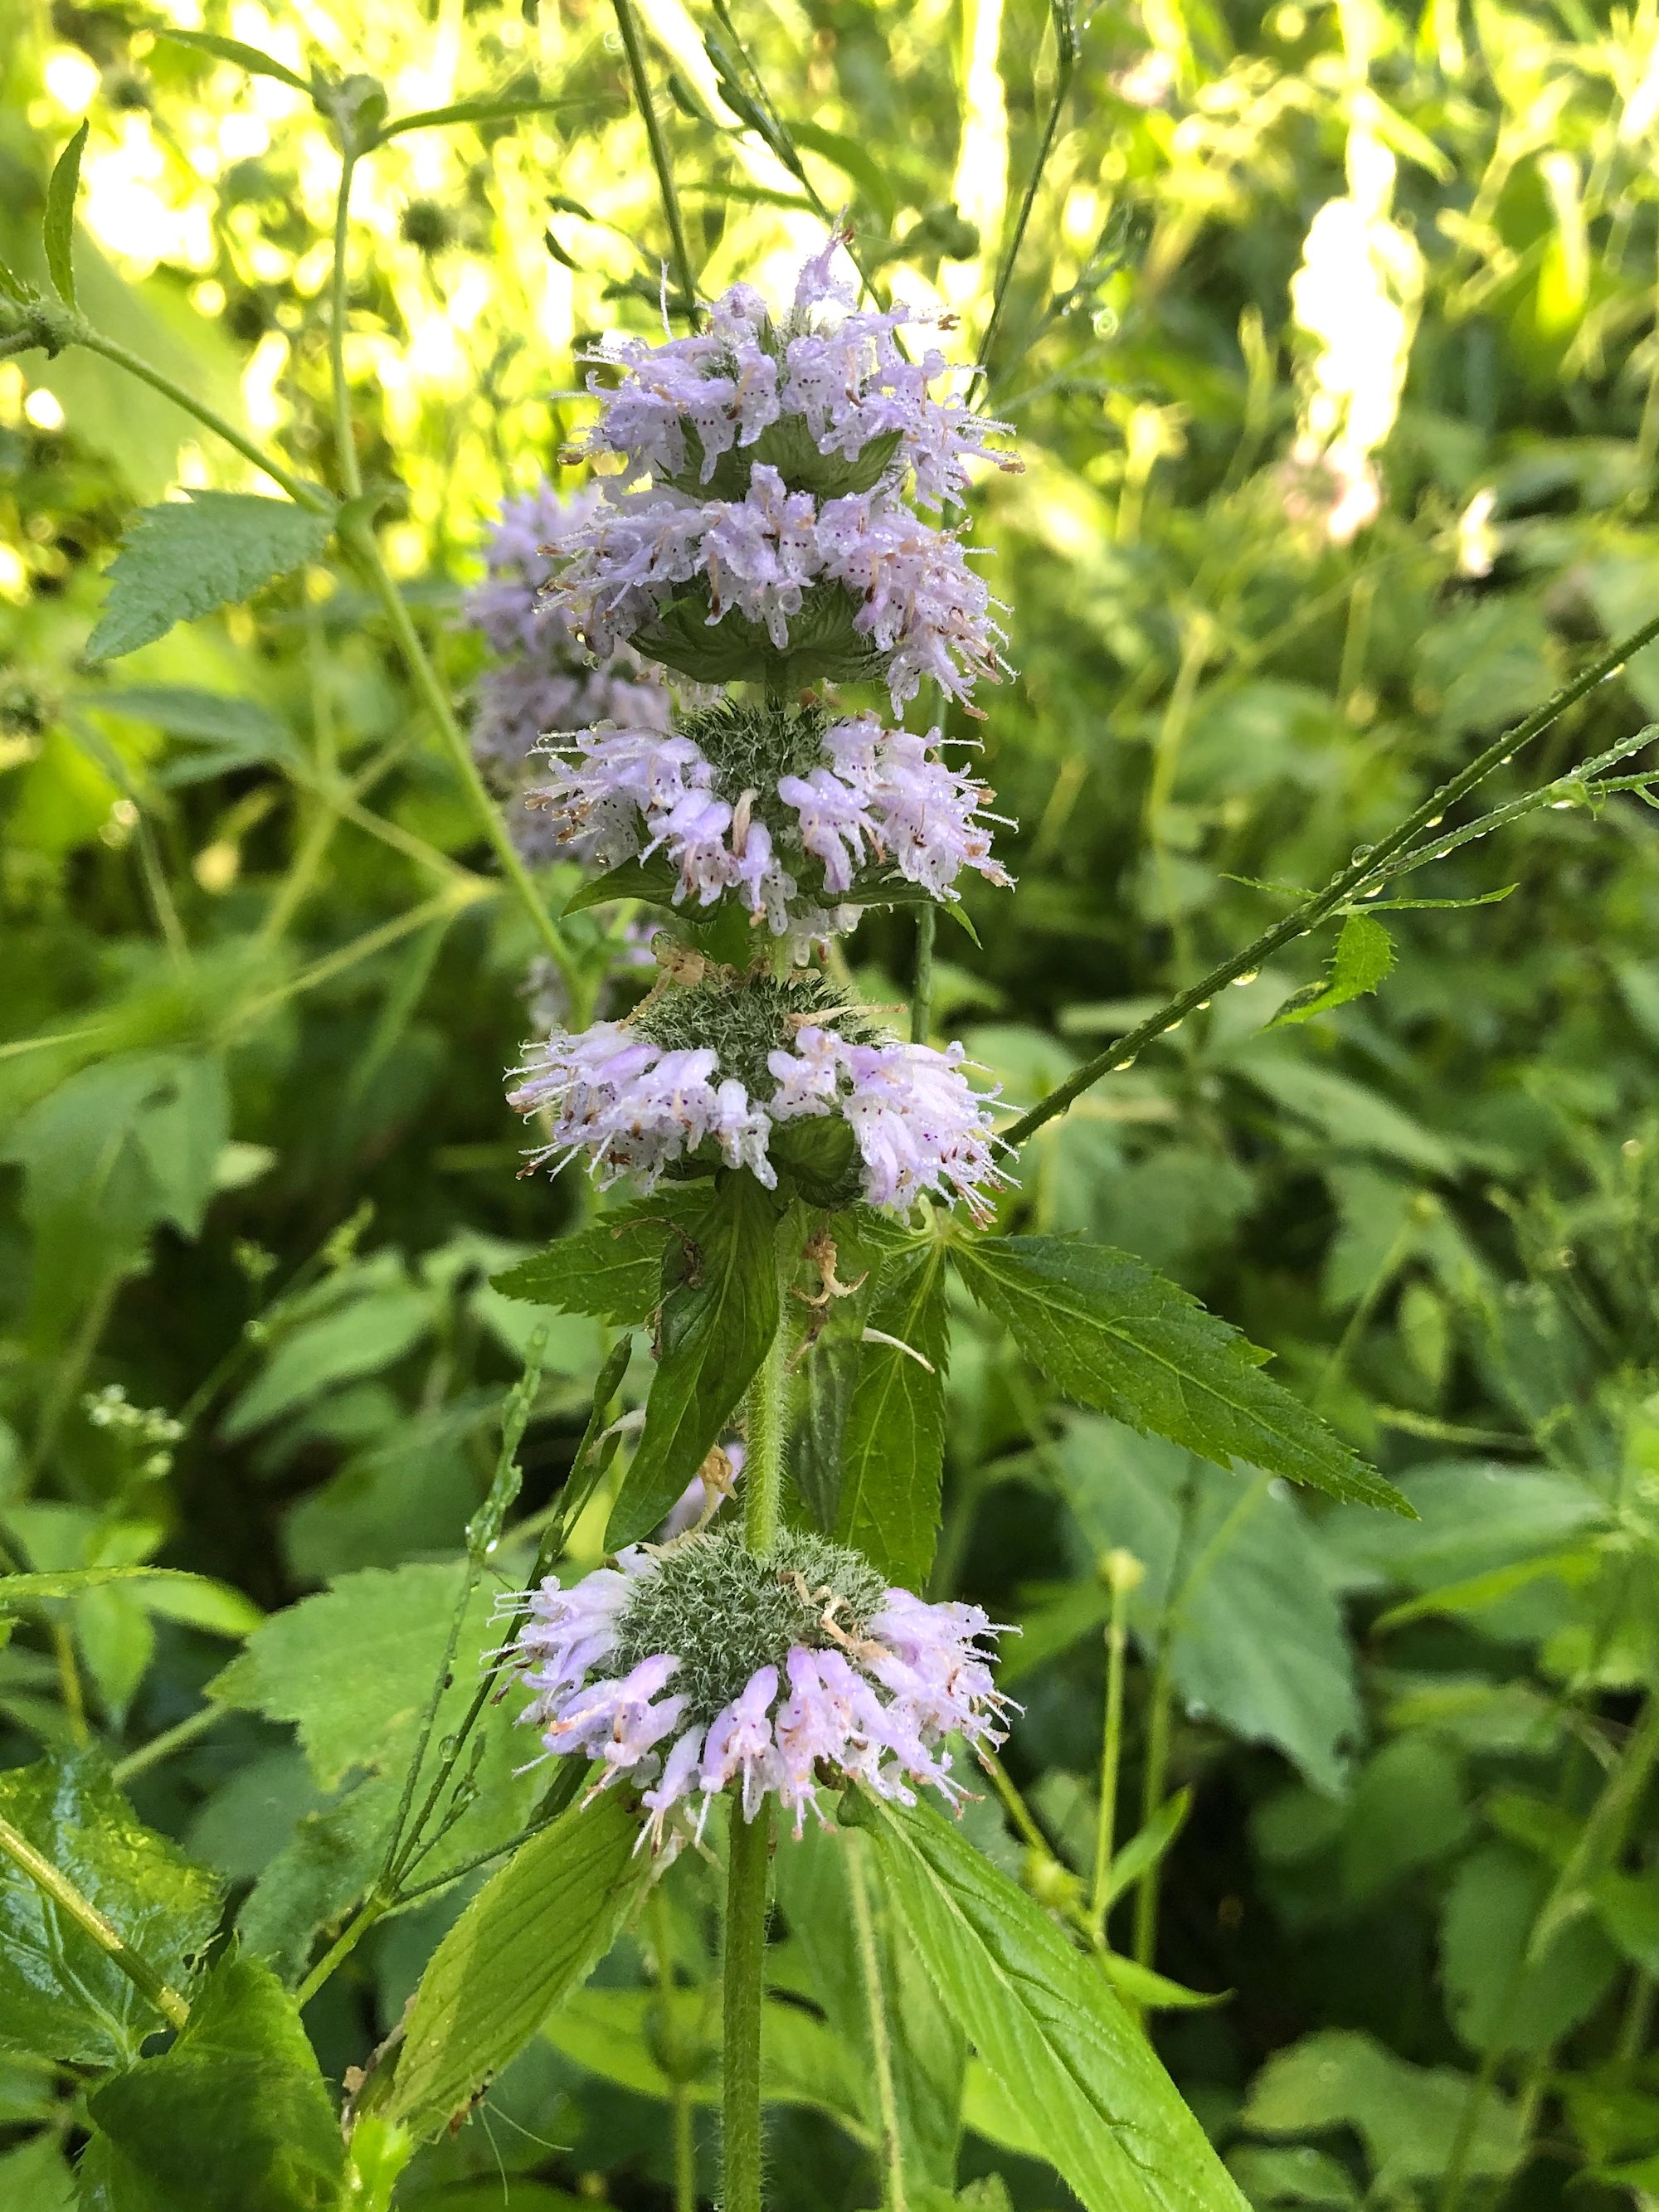 Downy Pagoda-plant in woods just behind Council Ring in the UW-Arboretum Oak Savanna in Madison, Wisconsin on June 25, 2020.